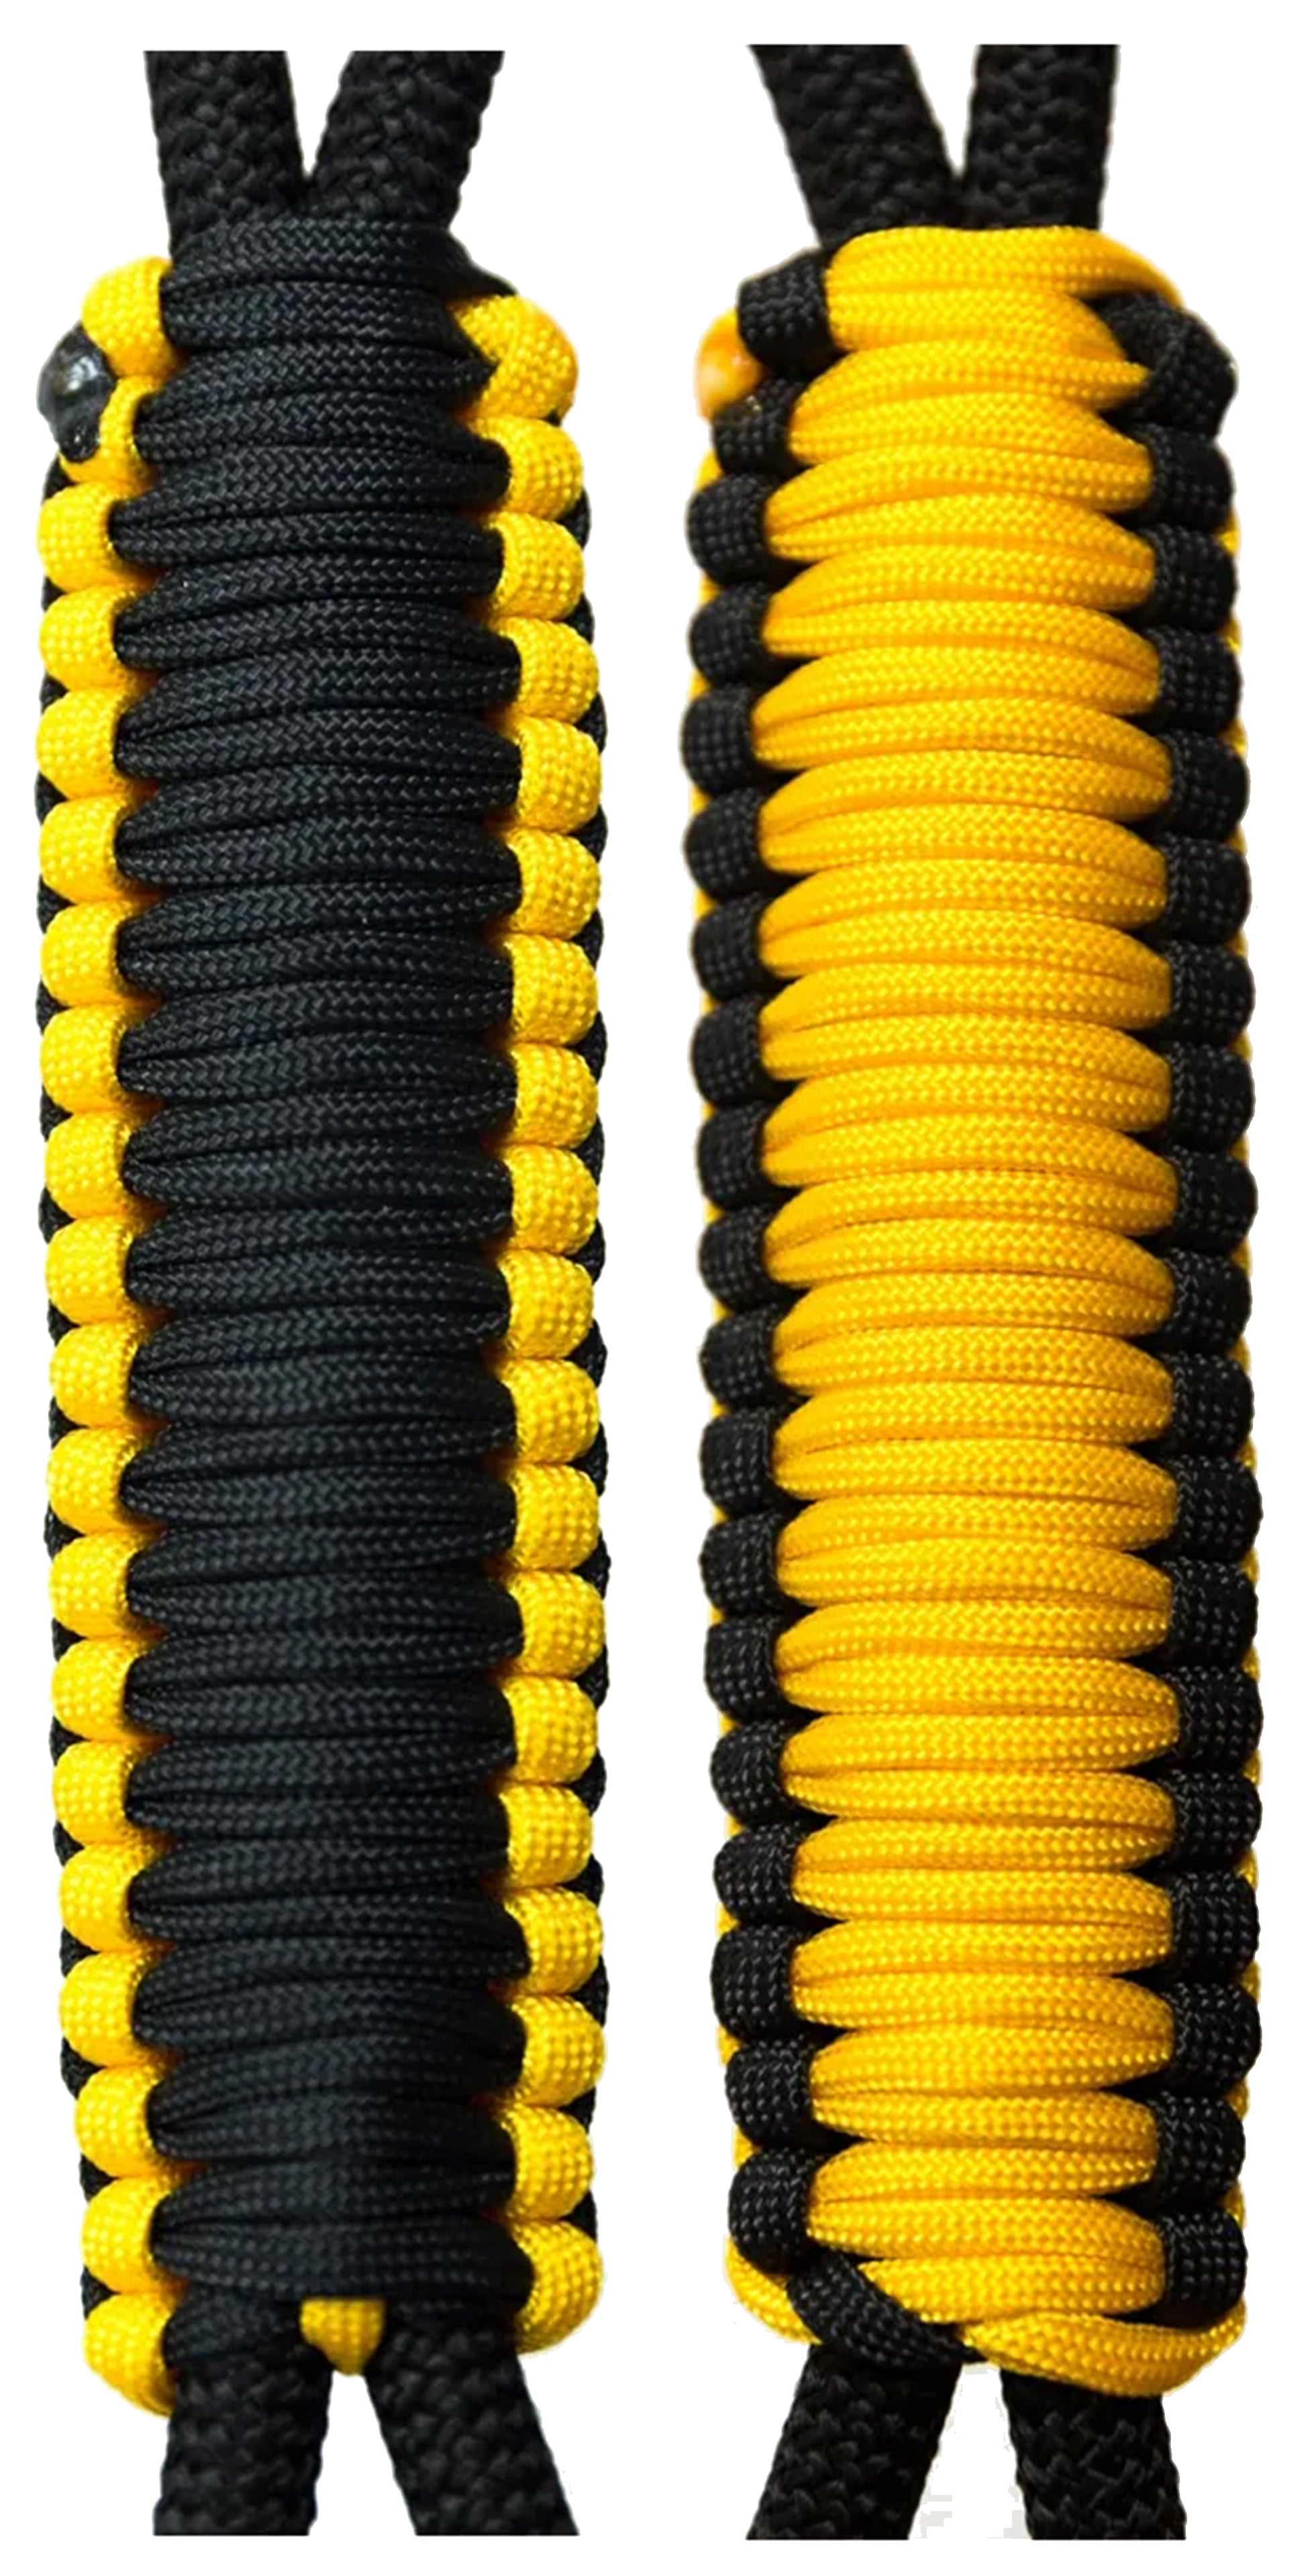 Black and Golden Yellow C031C026 - Paracord Handmade Handles for Stainless Steel Tumblers - Made in USA!